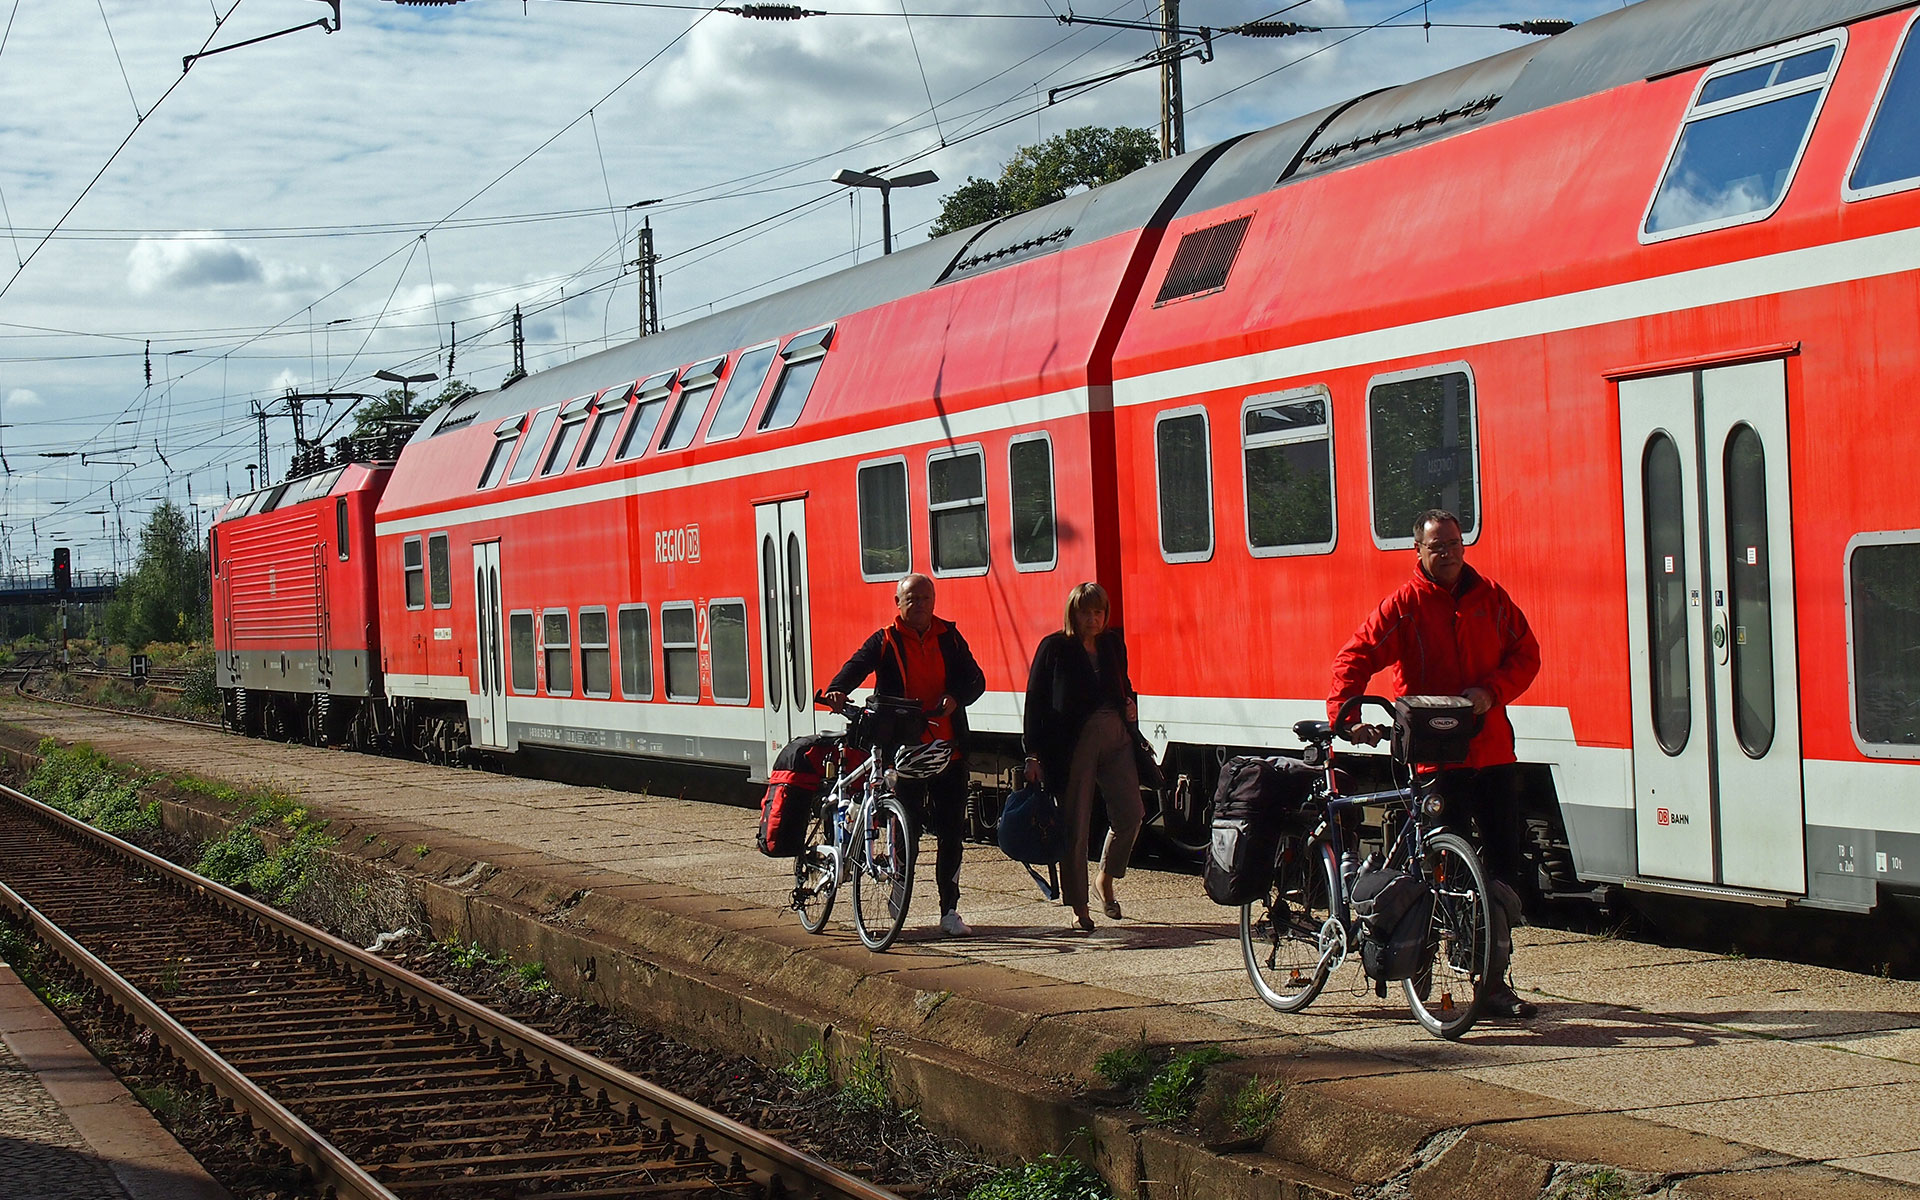 DB Regio with its distinctive red rolling stock pitches into the busy Berlin to Hamburg market from 14 April 2014 (photo © hidden europe).